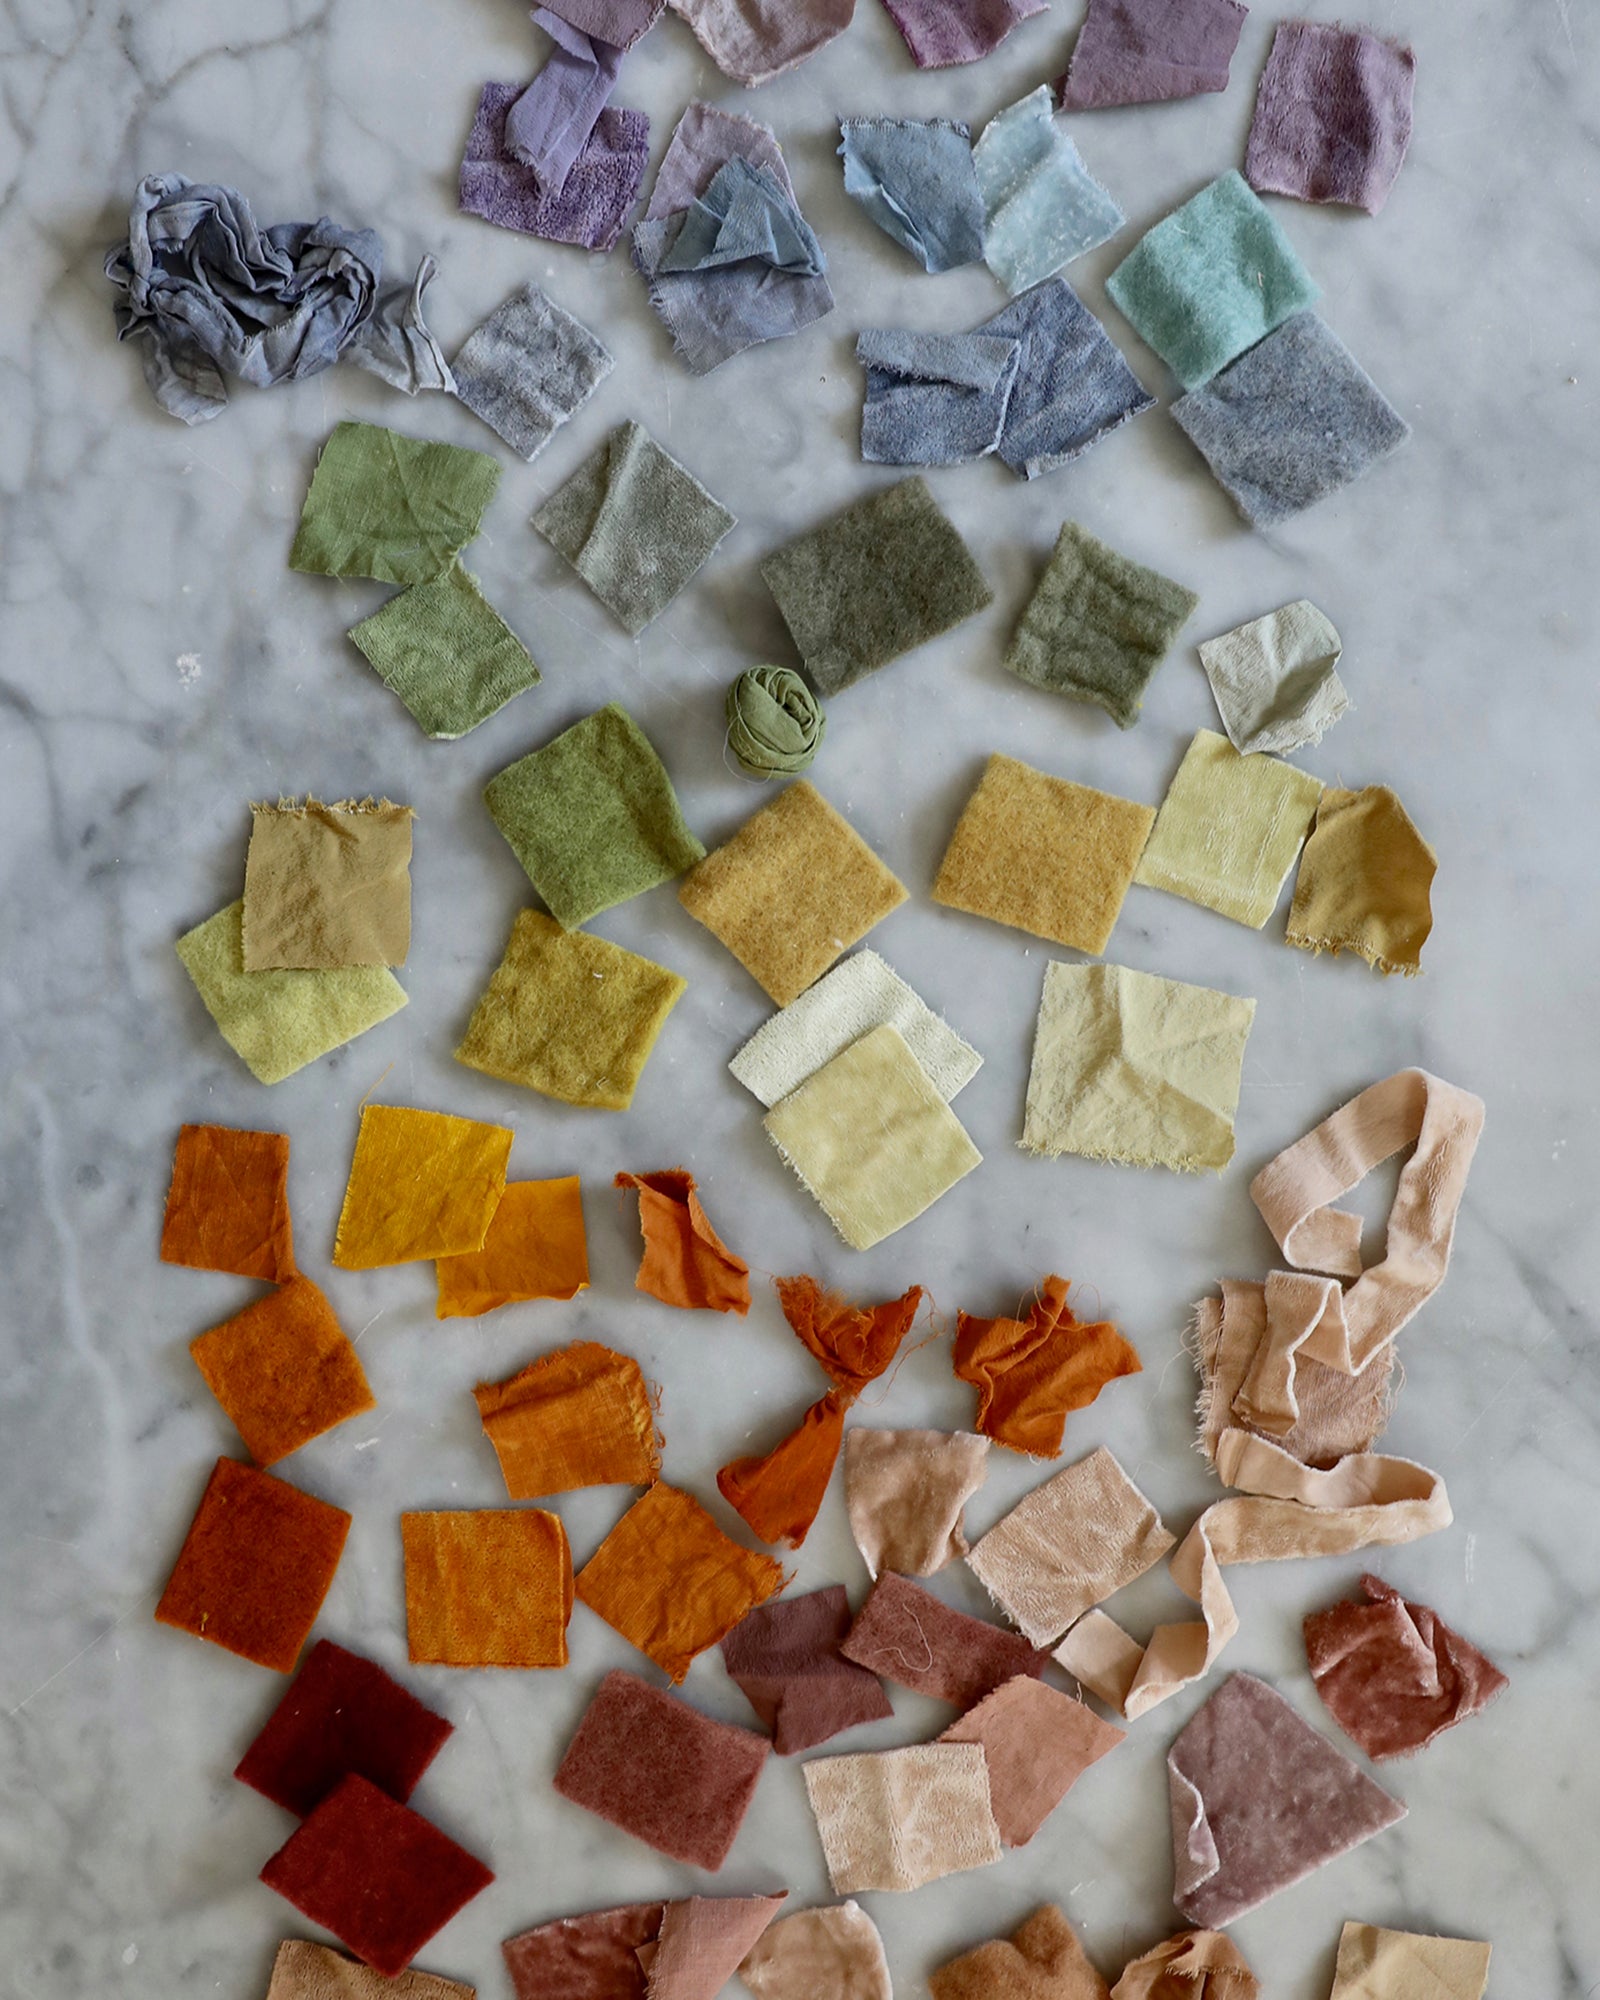 Capturing Color from Food Waste, Natural Dyeing Workshop with Maggie Pate